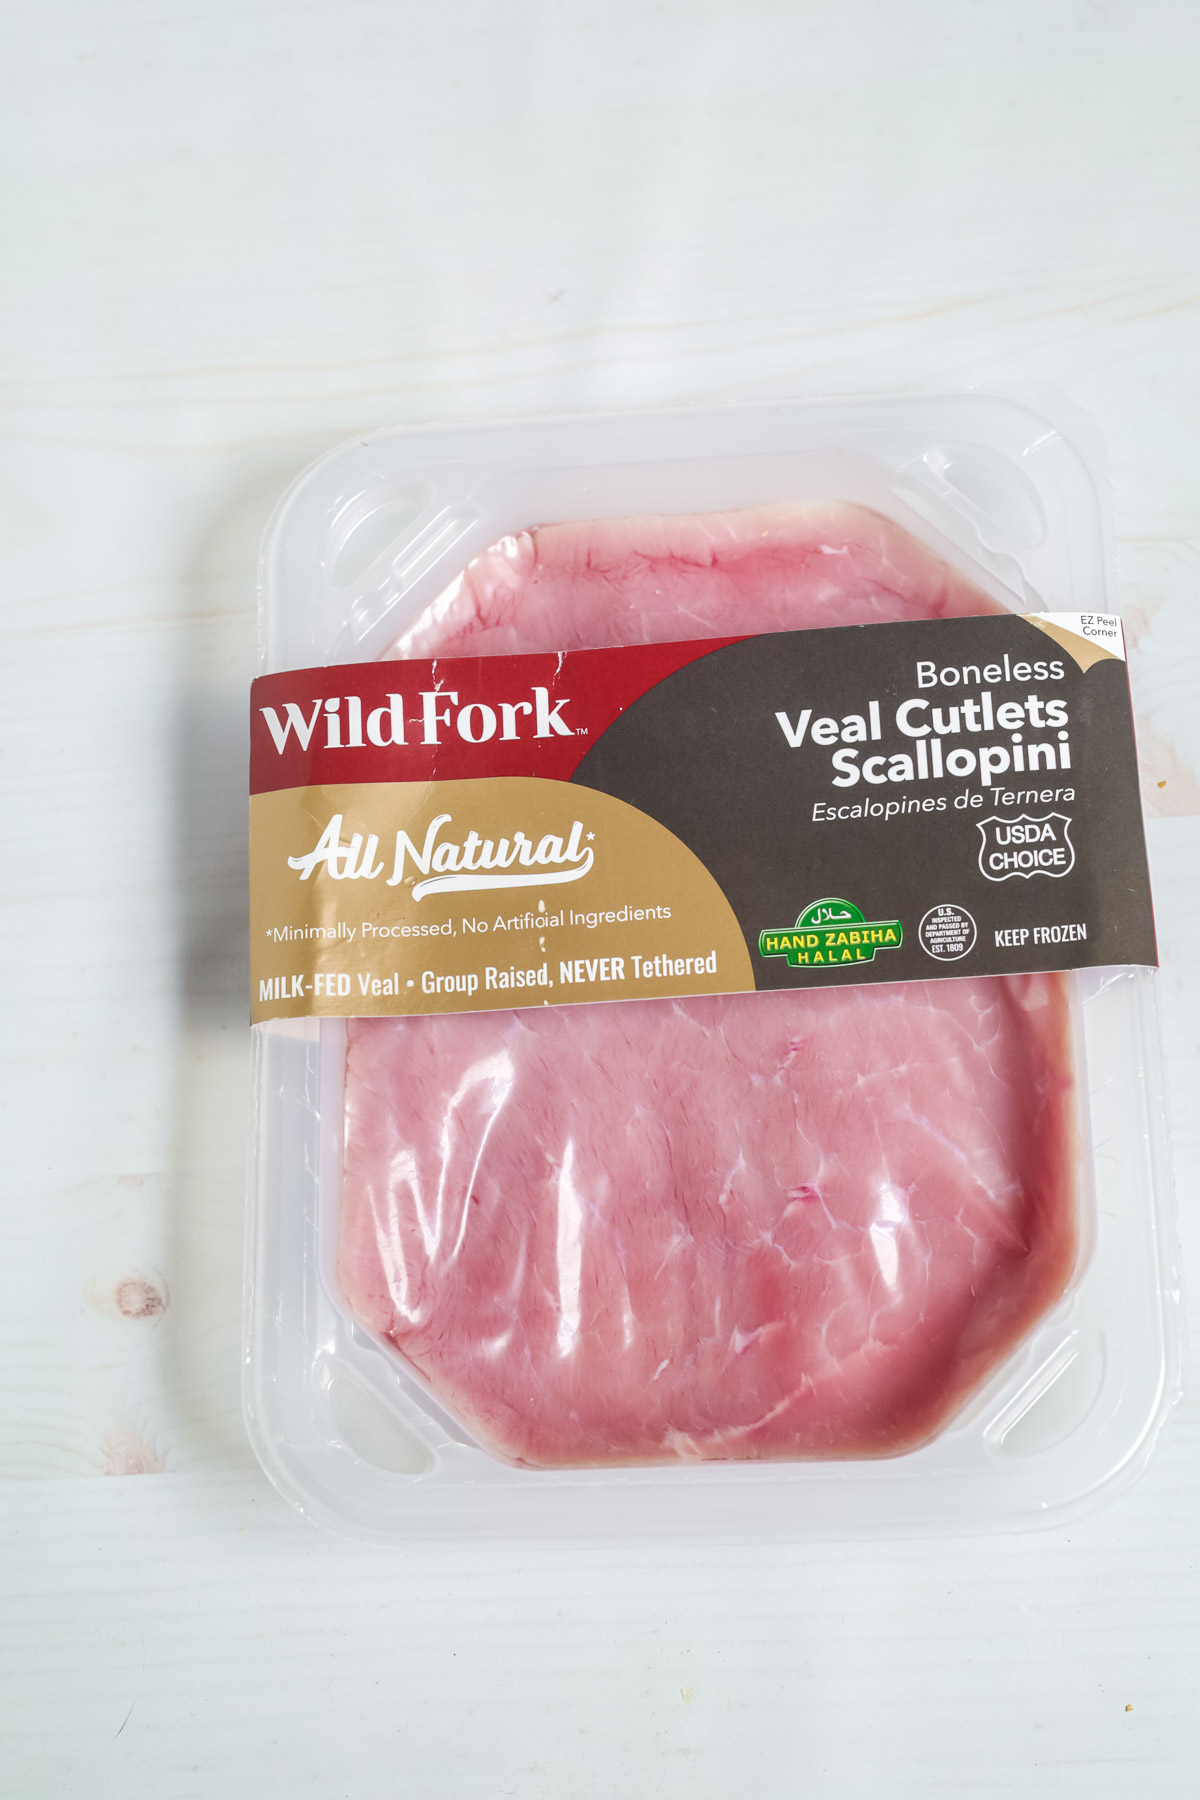 Package of veal scallopini cutlets